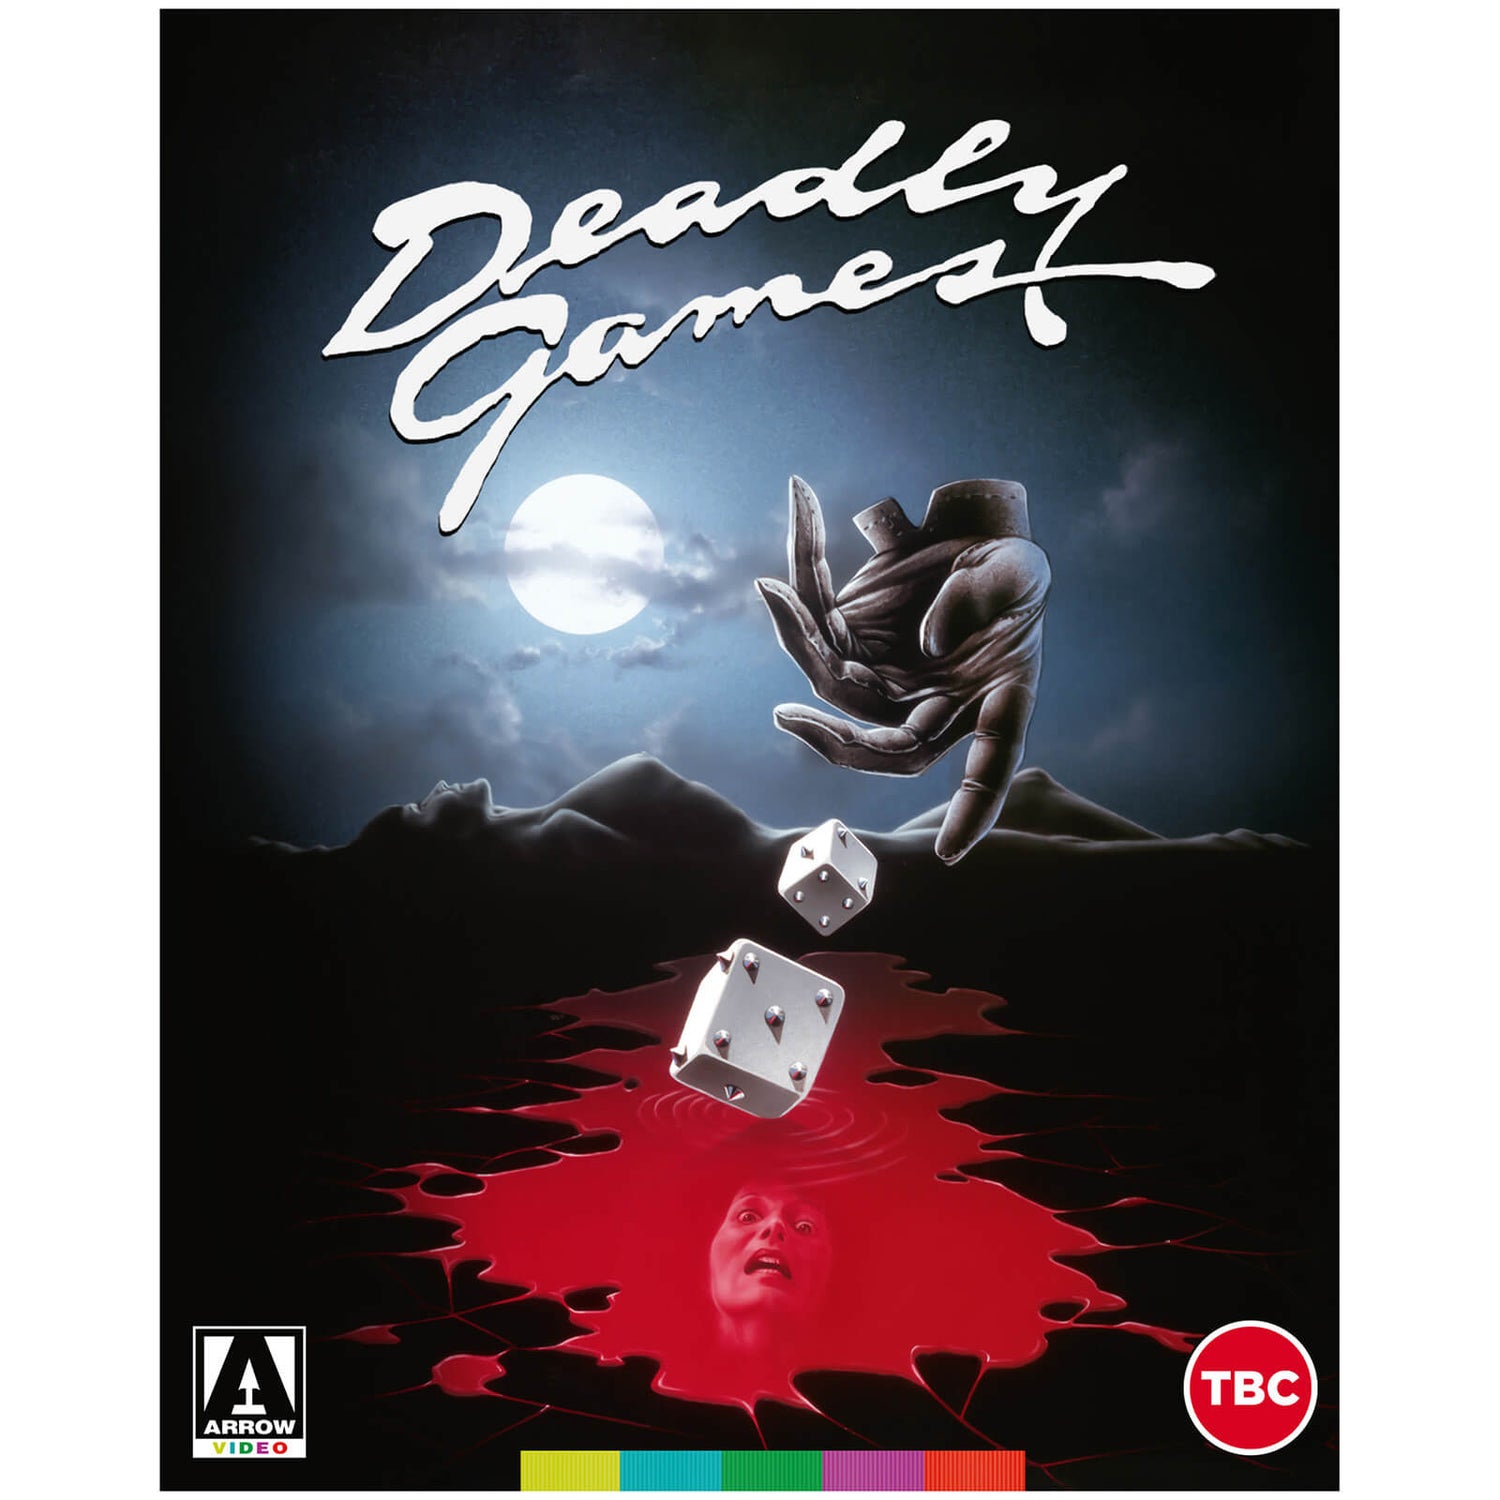 Deadly Games | Original Artwork Slipcover | Limited Edition Blu-ray